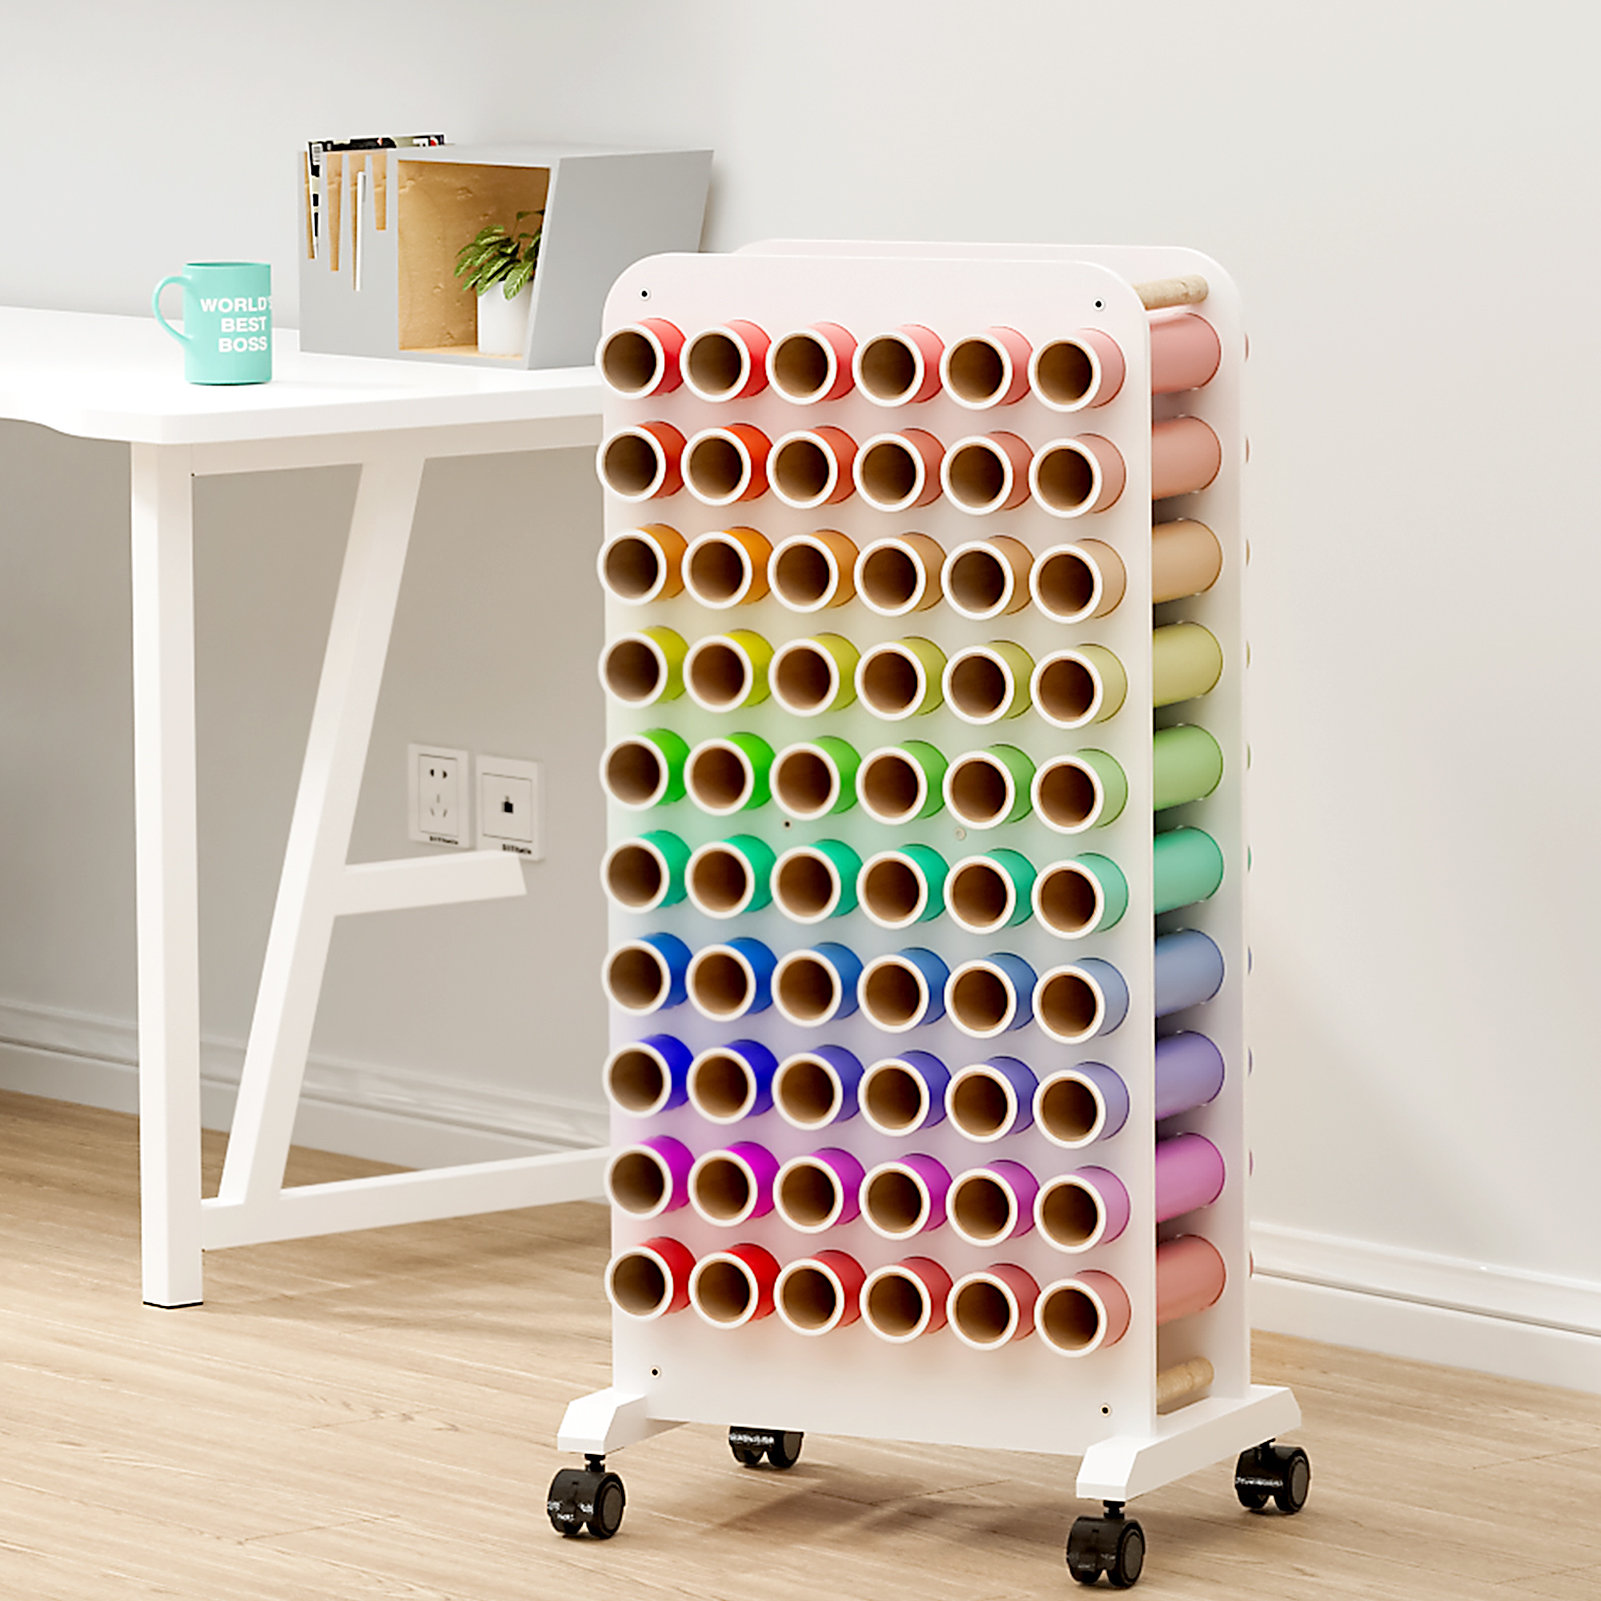 Ackitry Craft Table Mobile Vinyl Roll Holder 60 Compartments Vinyl